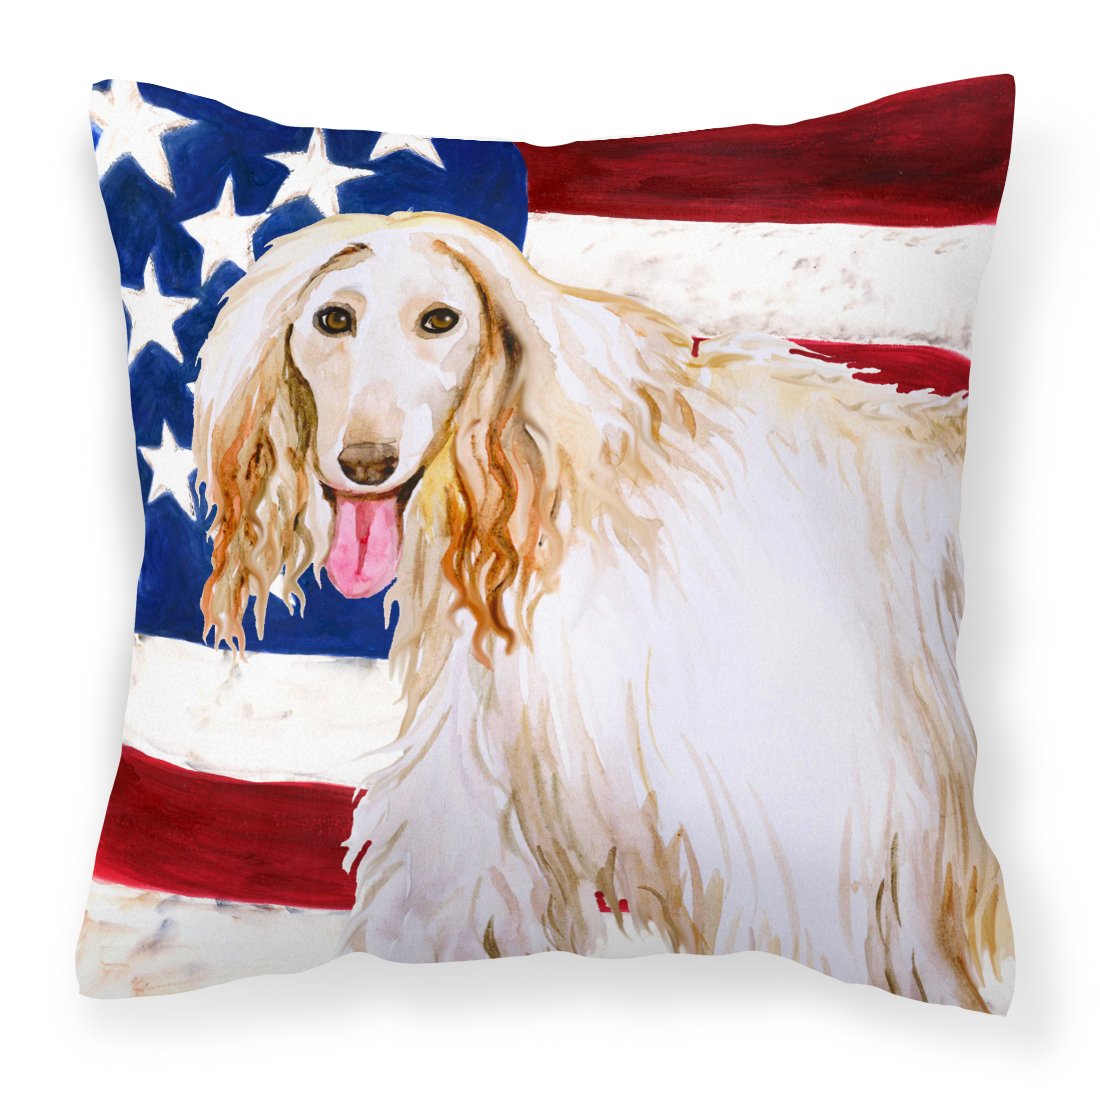 Afghan Hound Patriotic Fabric Decorative Pillow BB9702PW1818 by Caroline's Treasures